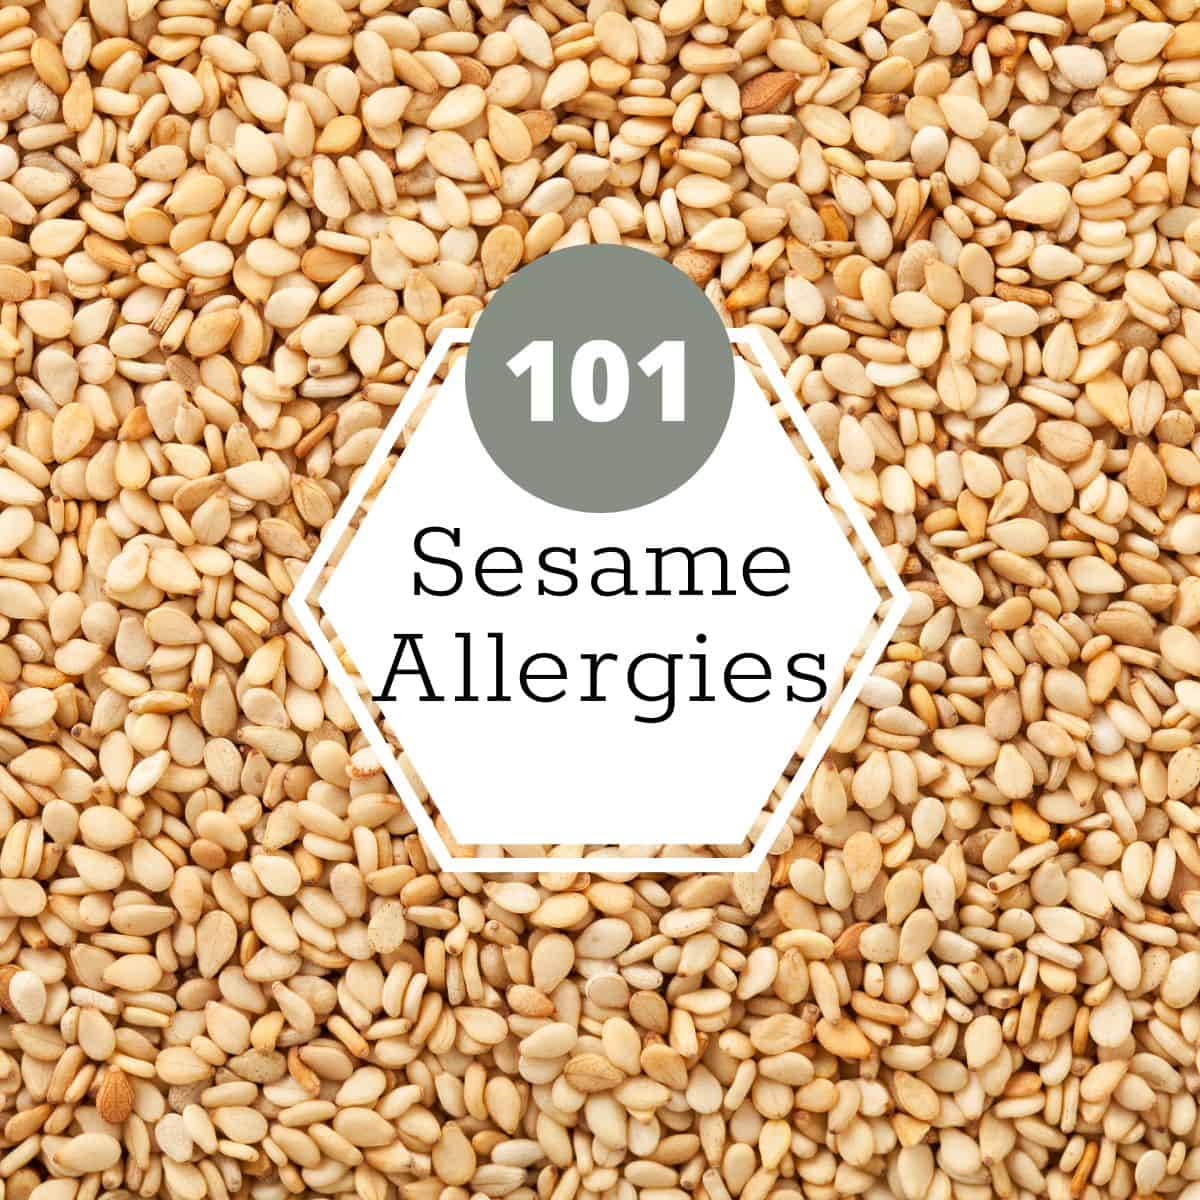 Close up of many sesame seeds. A white hexagon with text written on it is in the middle that says, "sesame allergies 101".